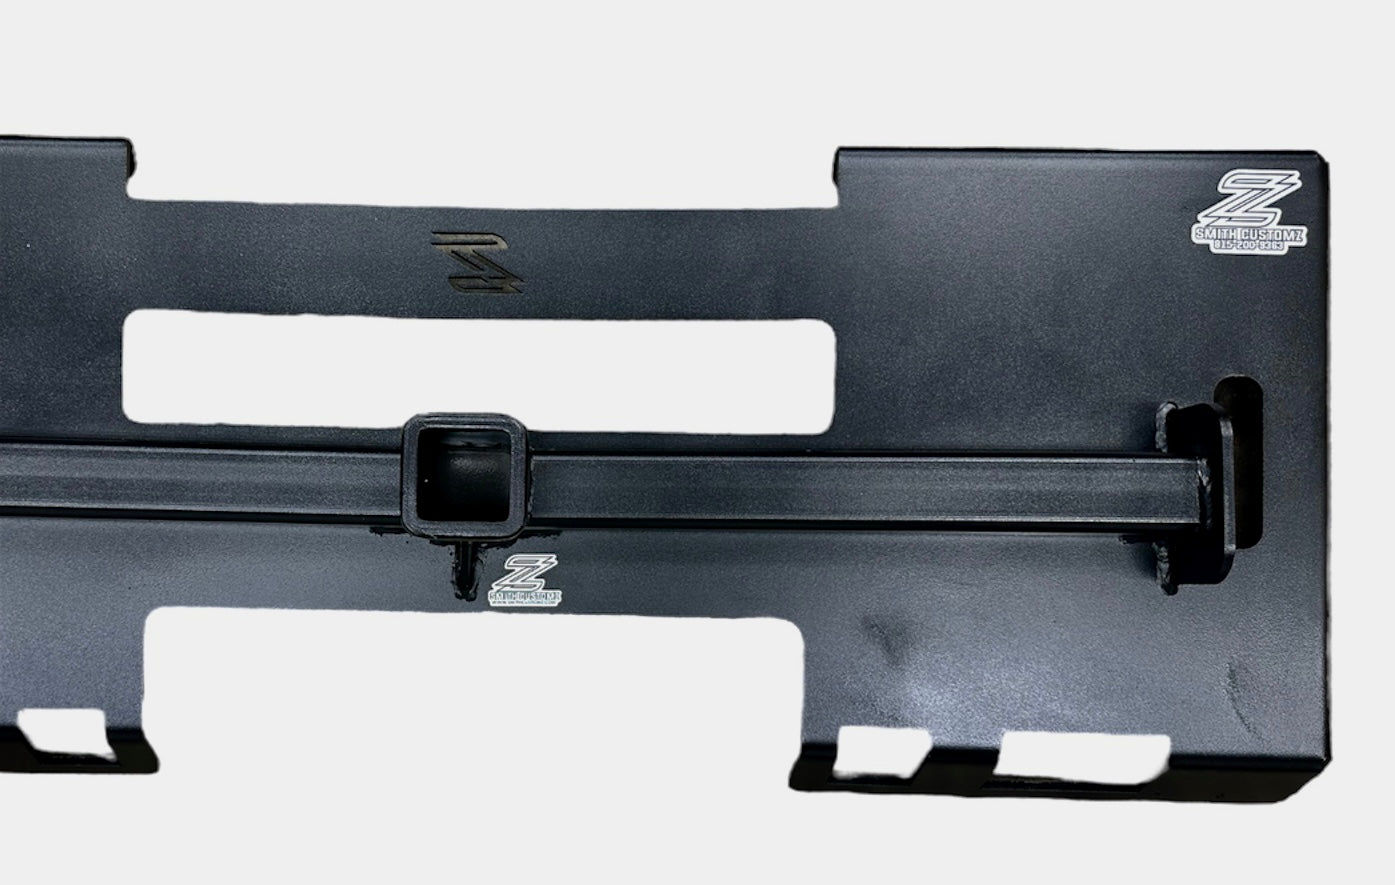 Full-size Skid Steer Trailer Hitch Mover Attachment